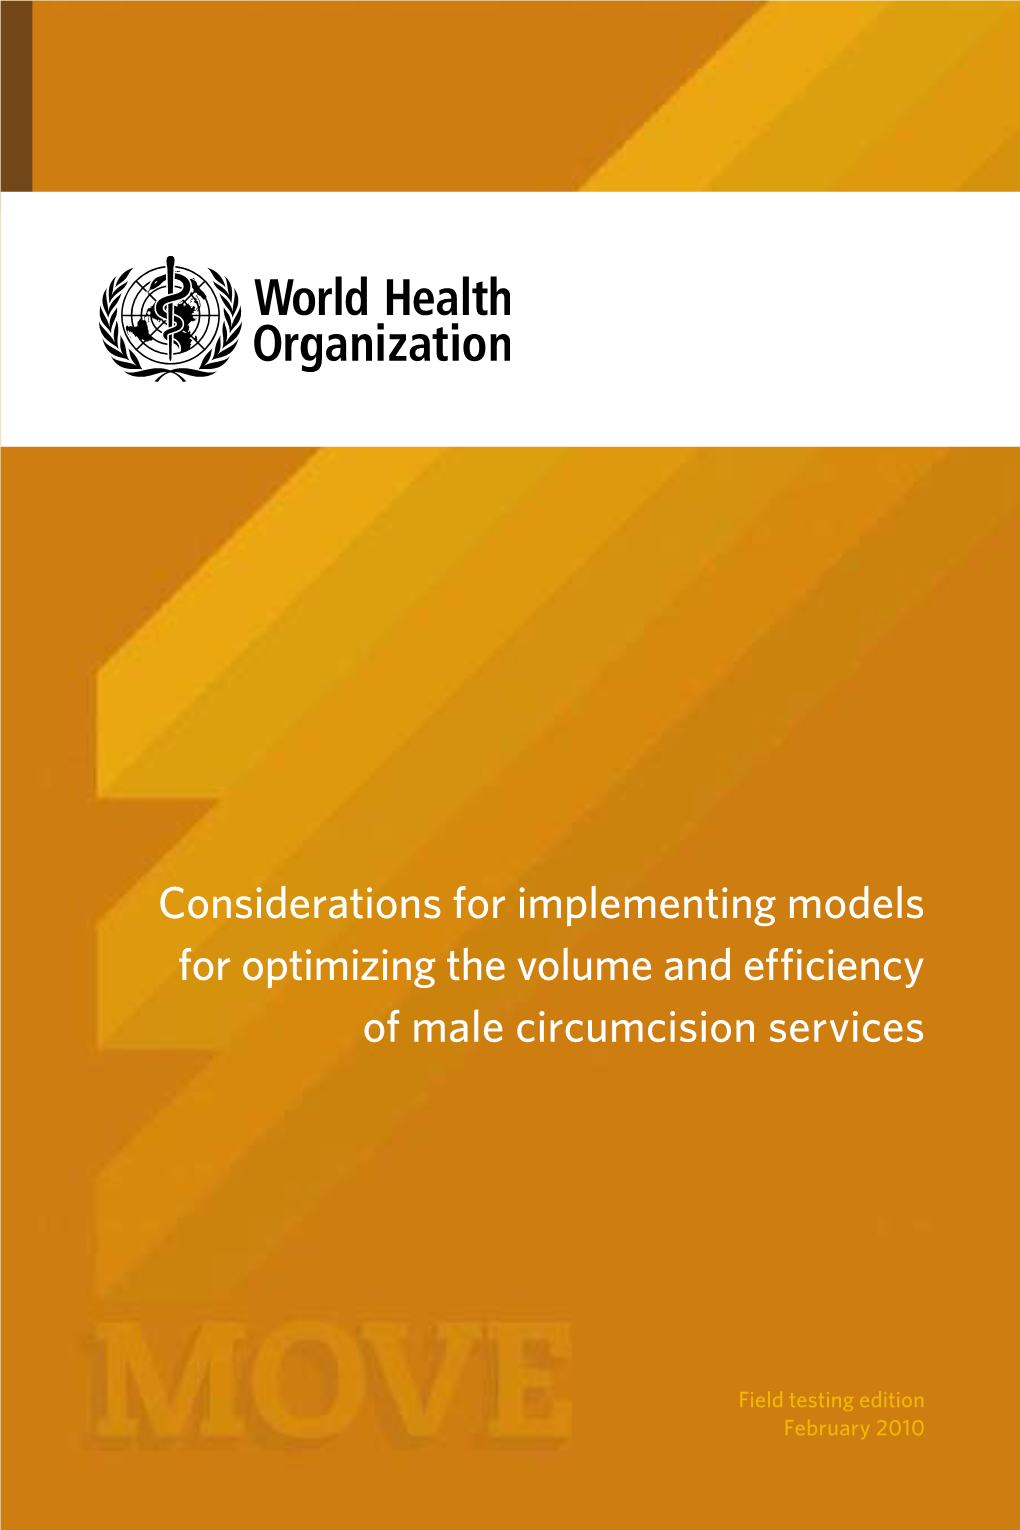 Considerations for Implementing Models for Optimizing the Volume and Efficiency of Male Circumcision Services